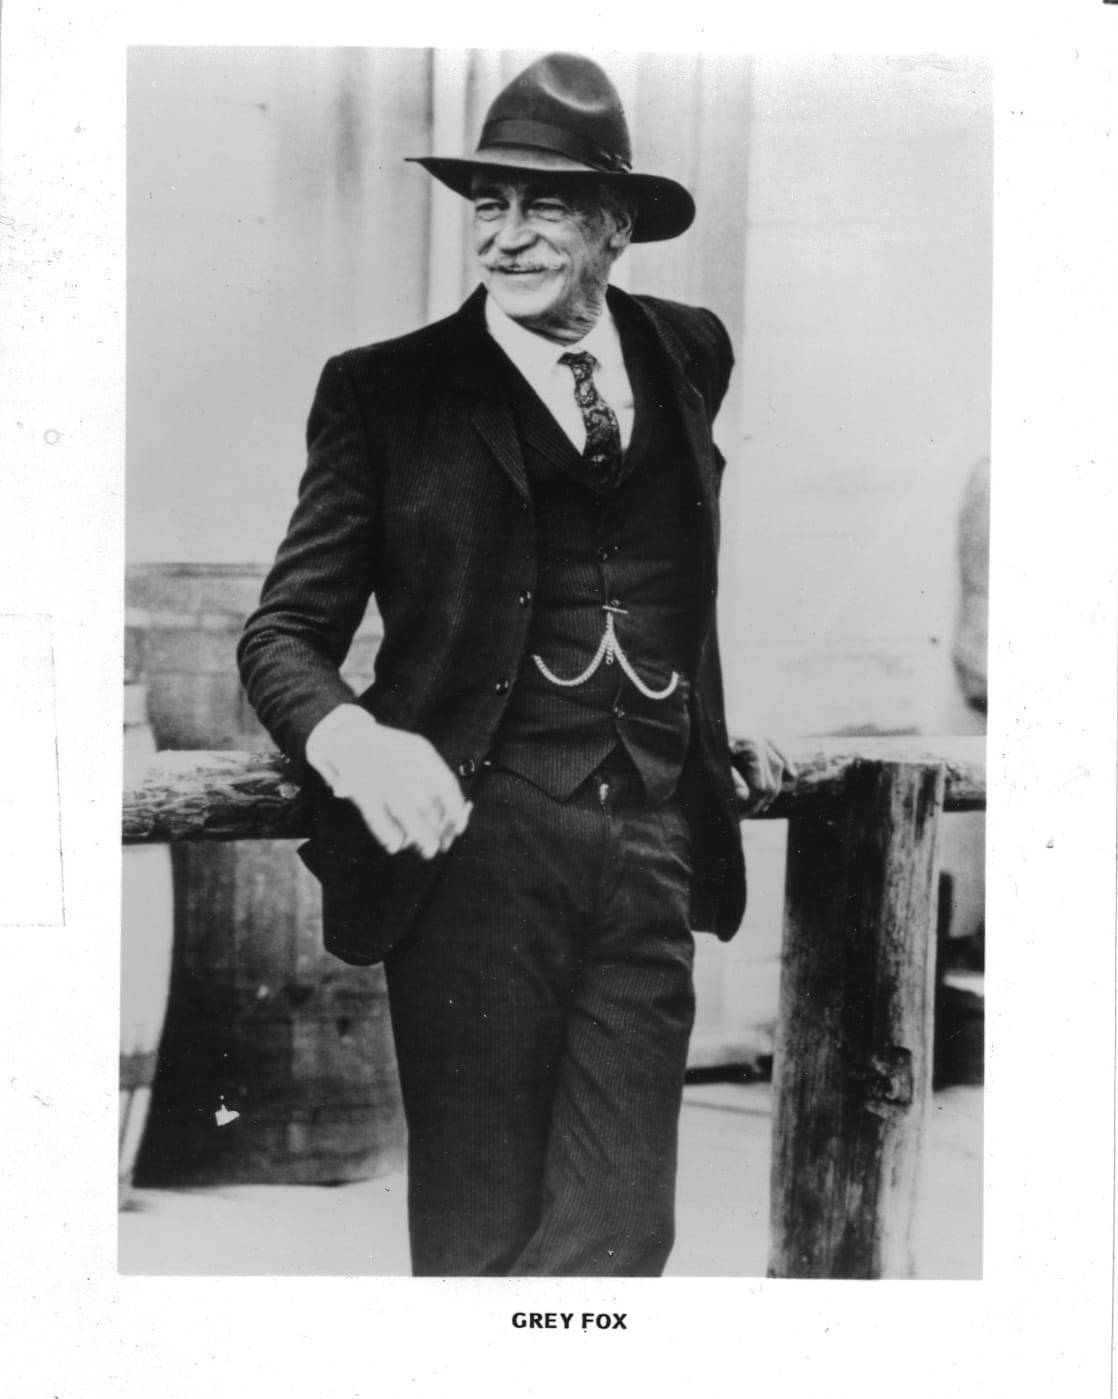 Richard Farnsworth Black And White Cowboy Hat And Suit Wallpaper